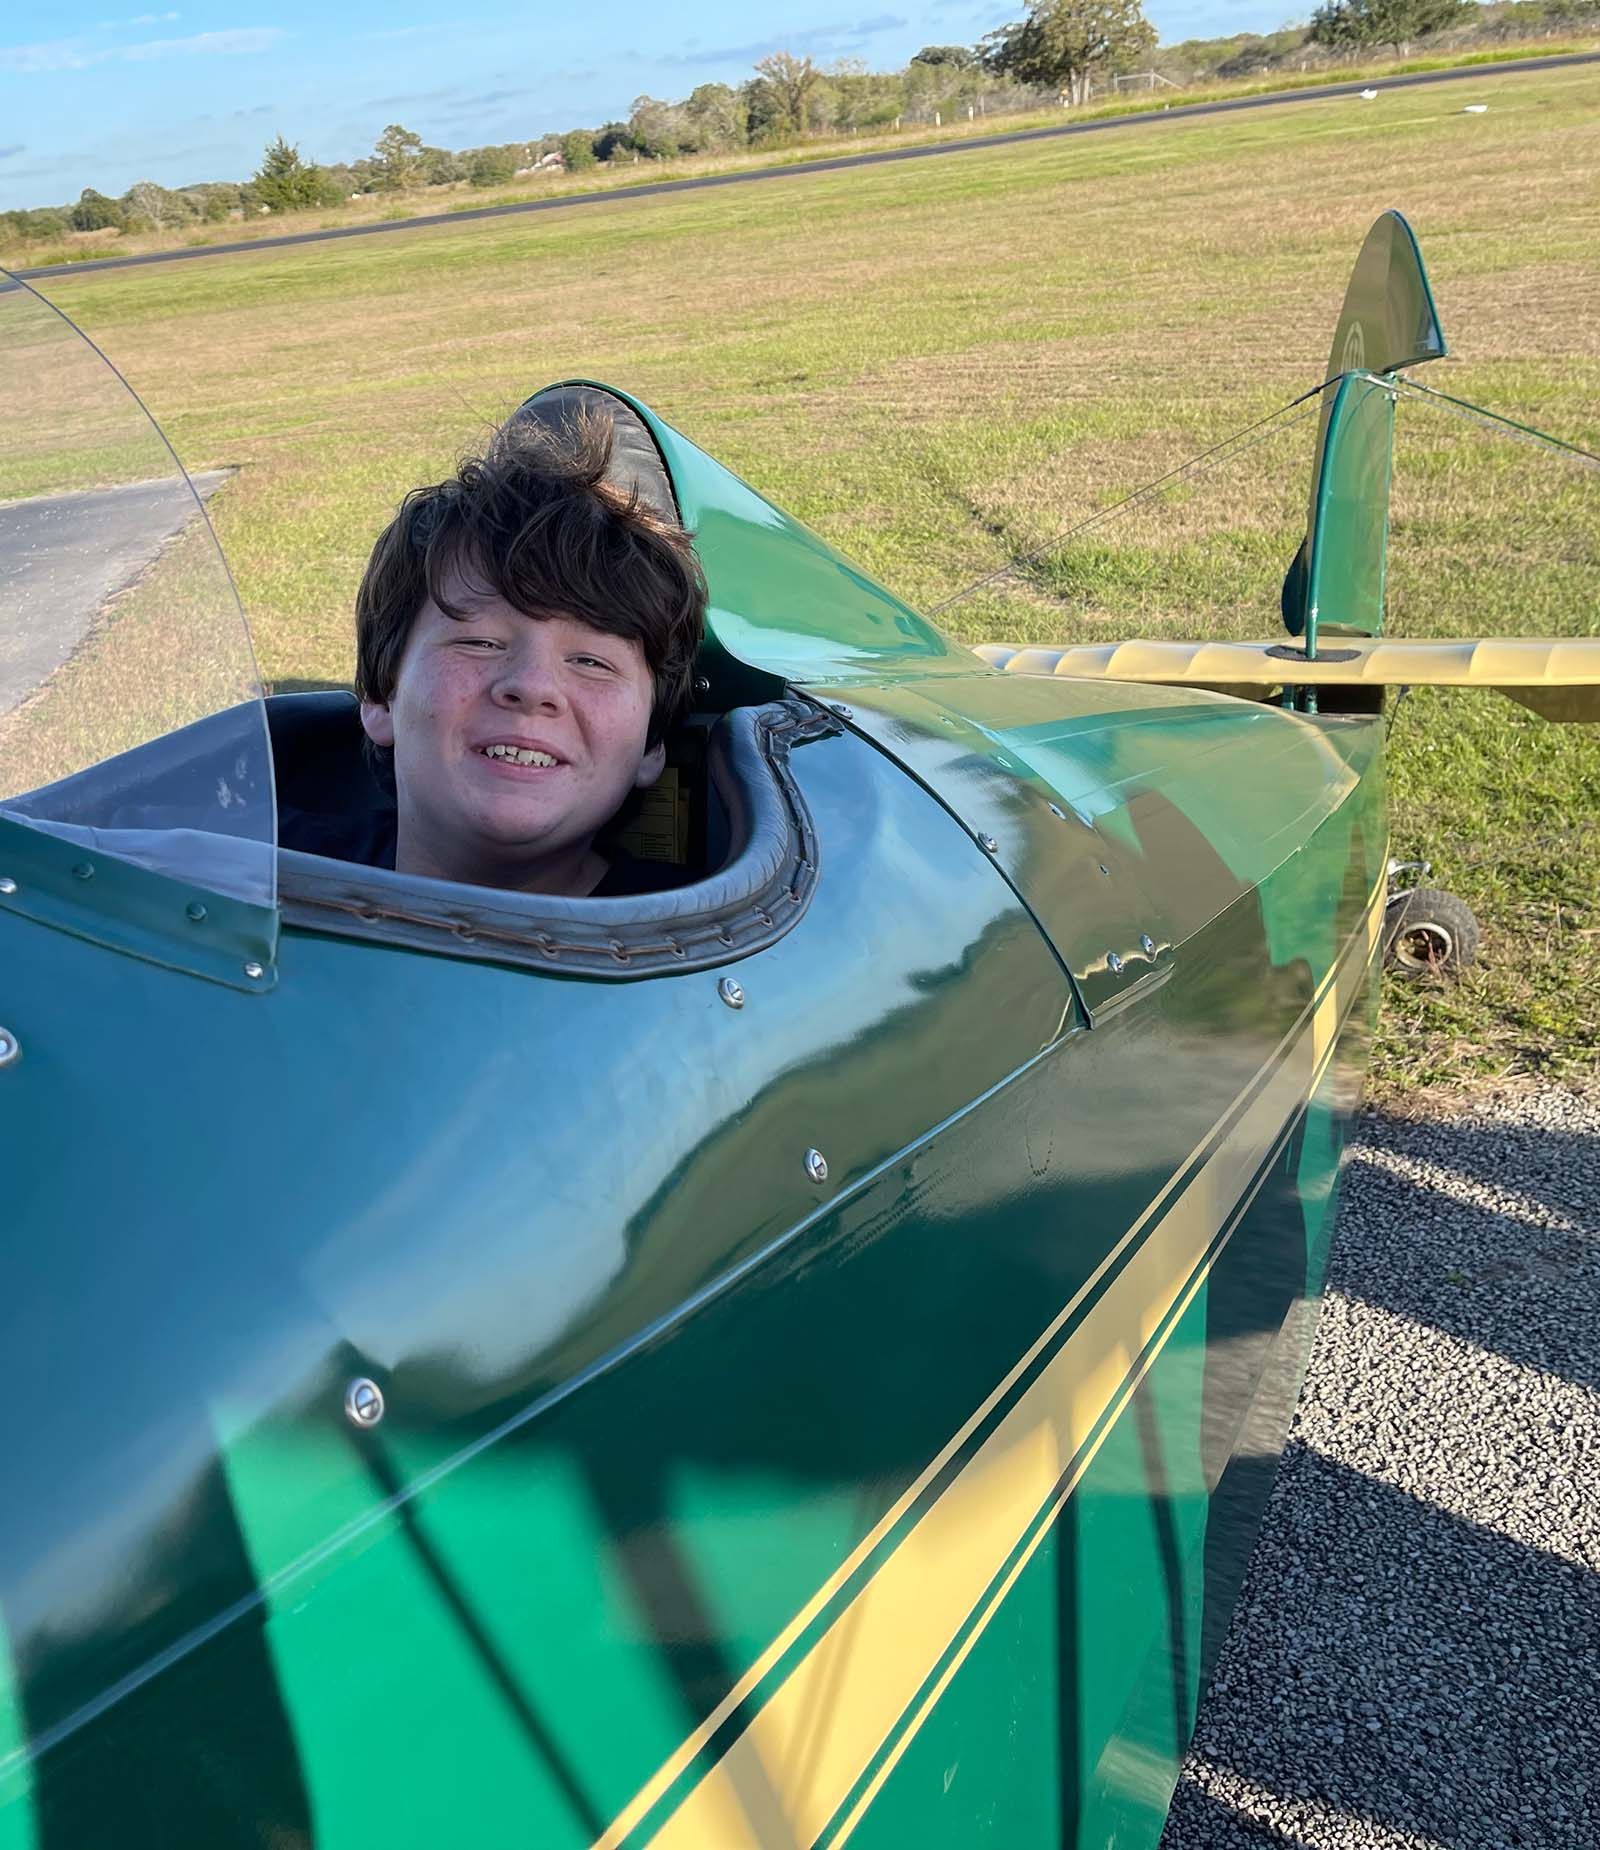 close up of smiling boy in the open cockpit of a 1929 fleet biplane